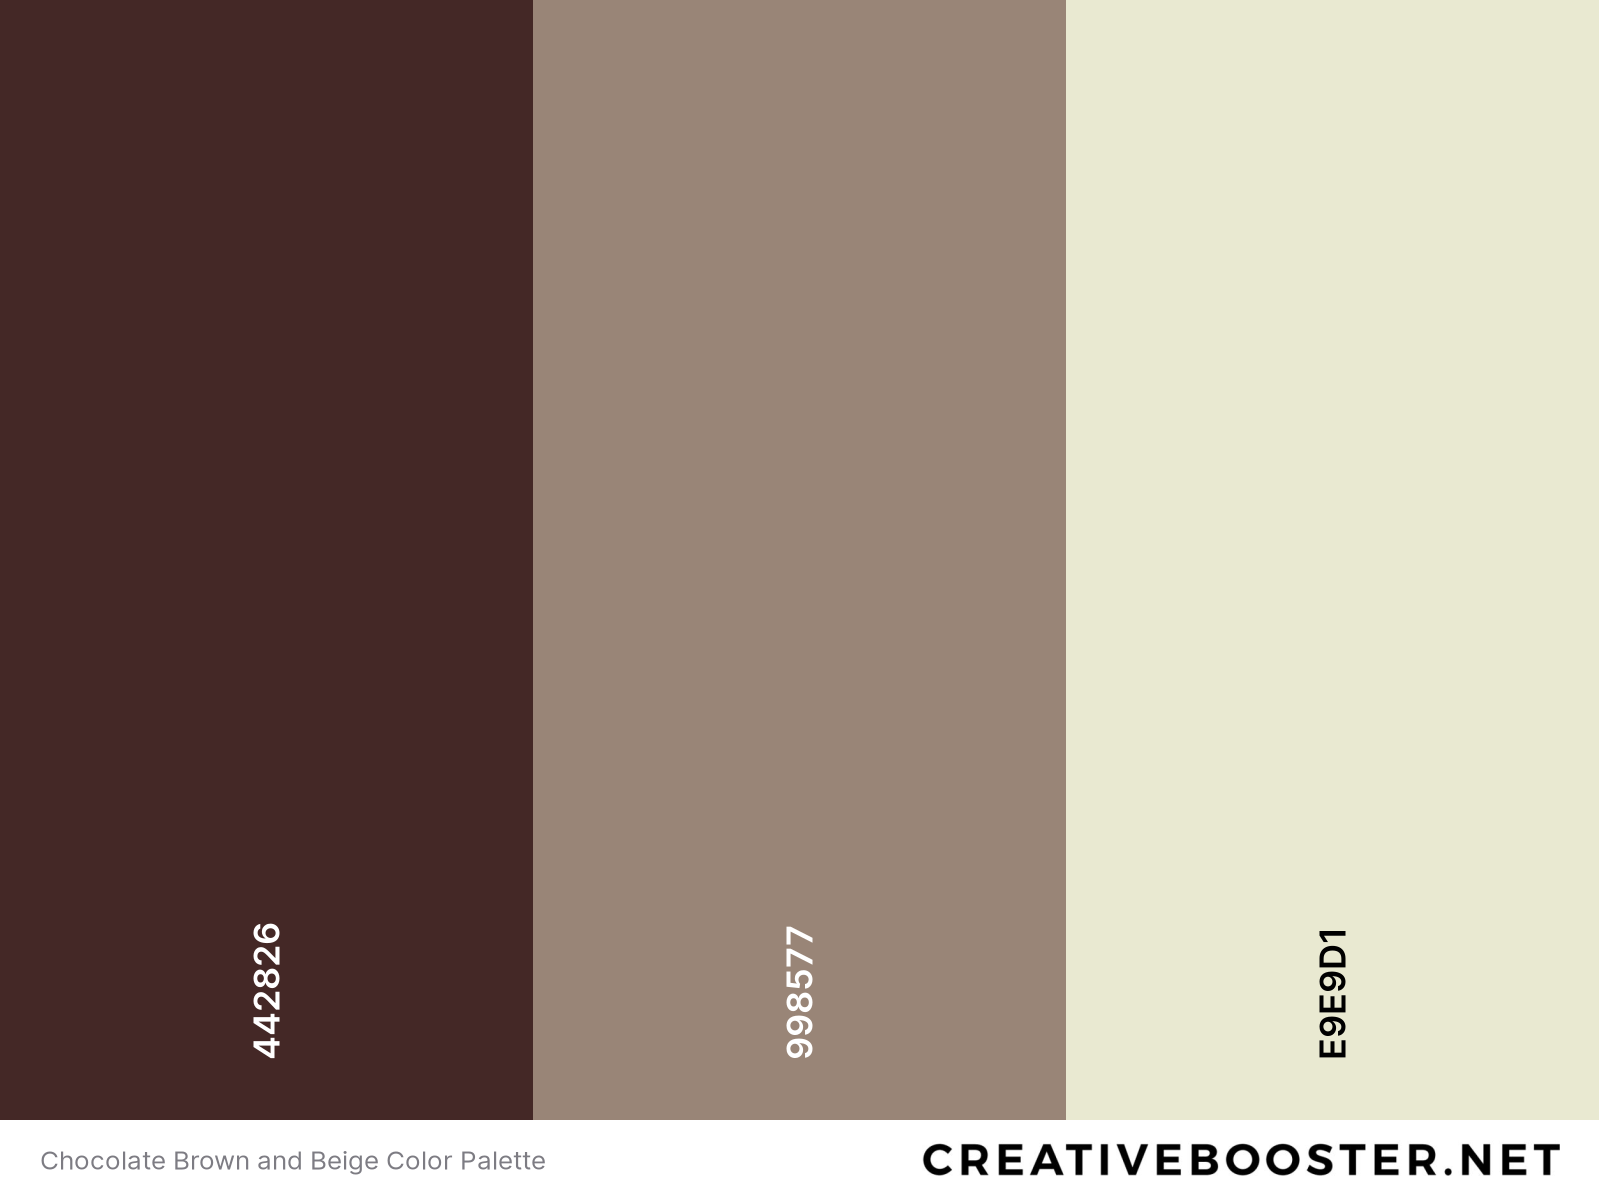 Chocolate Brown and Beige Color Palette